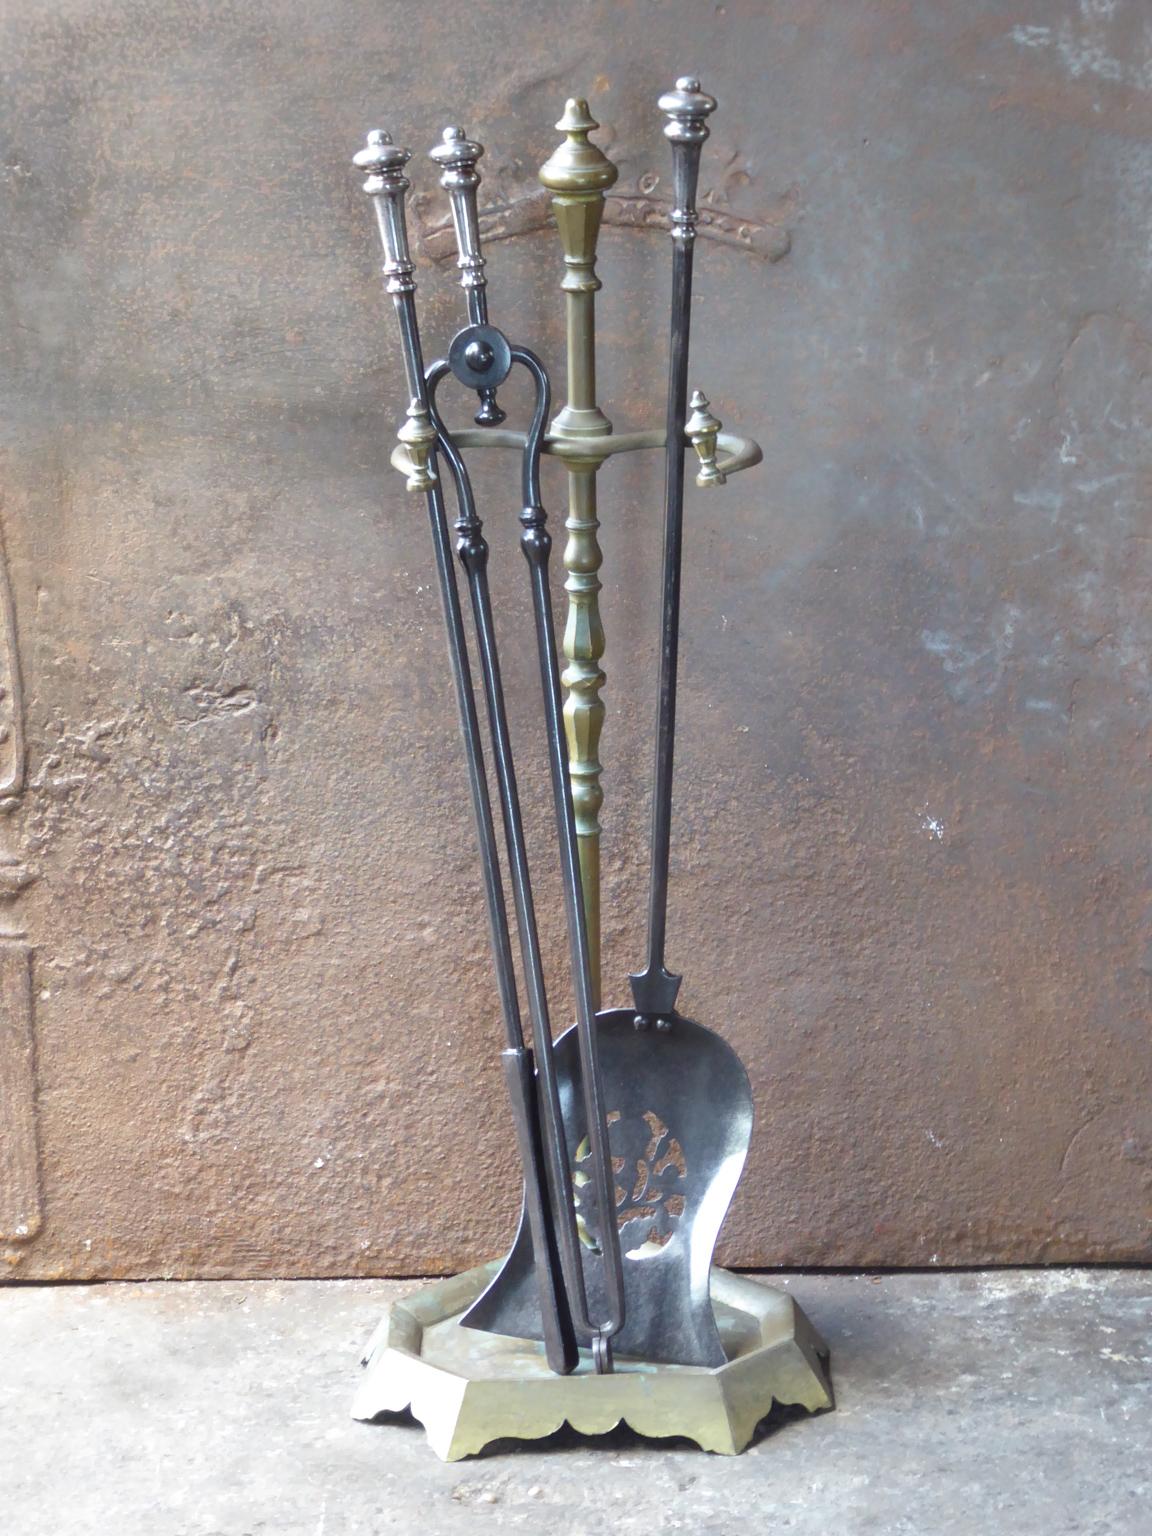 Beautiful 19th century English Victorian fireplace toolset made of brass and polished steel. The toolset consists of three fire irons and a stand. The condition is good.













